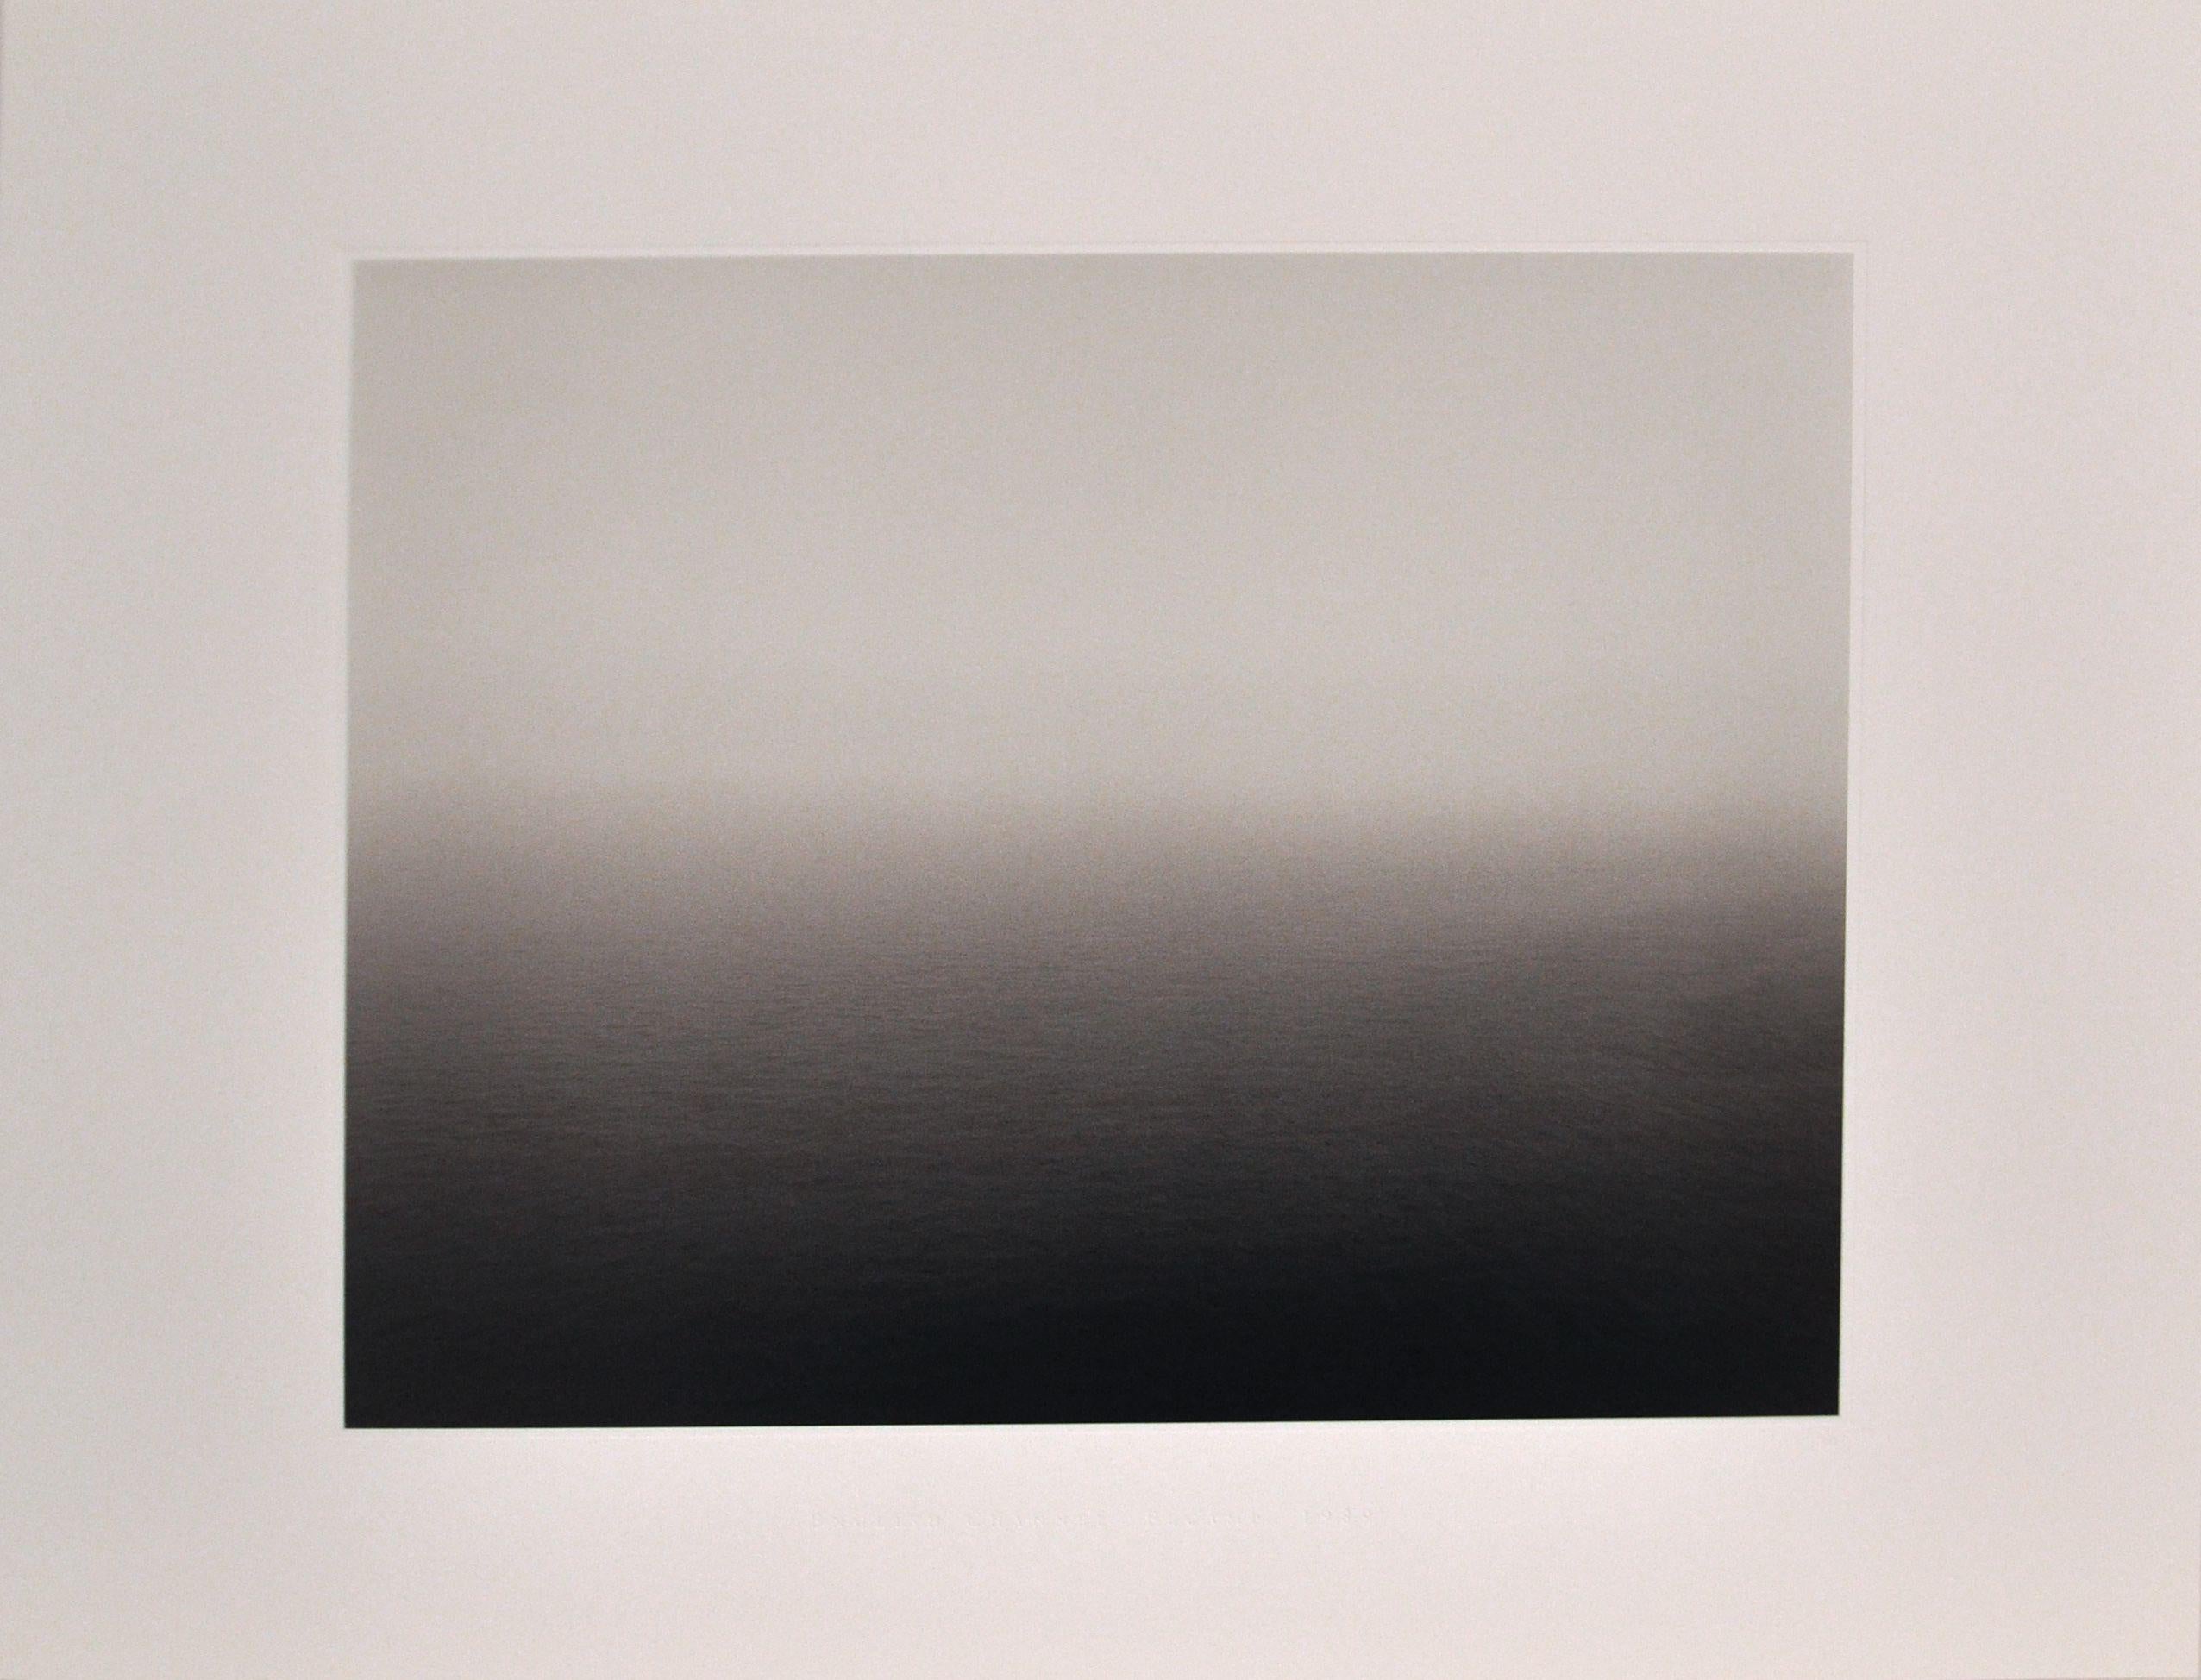 Part of Sugimoto's Time Exposed series, in which he photographs, using the same format for each, different seas. The mood, detail of waves, and weather affects the way in which the space reads as a landscape or more abstractly. 